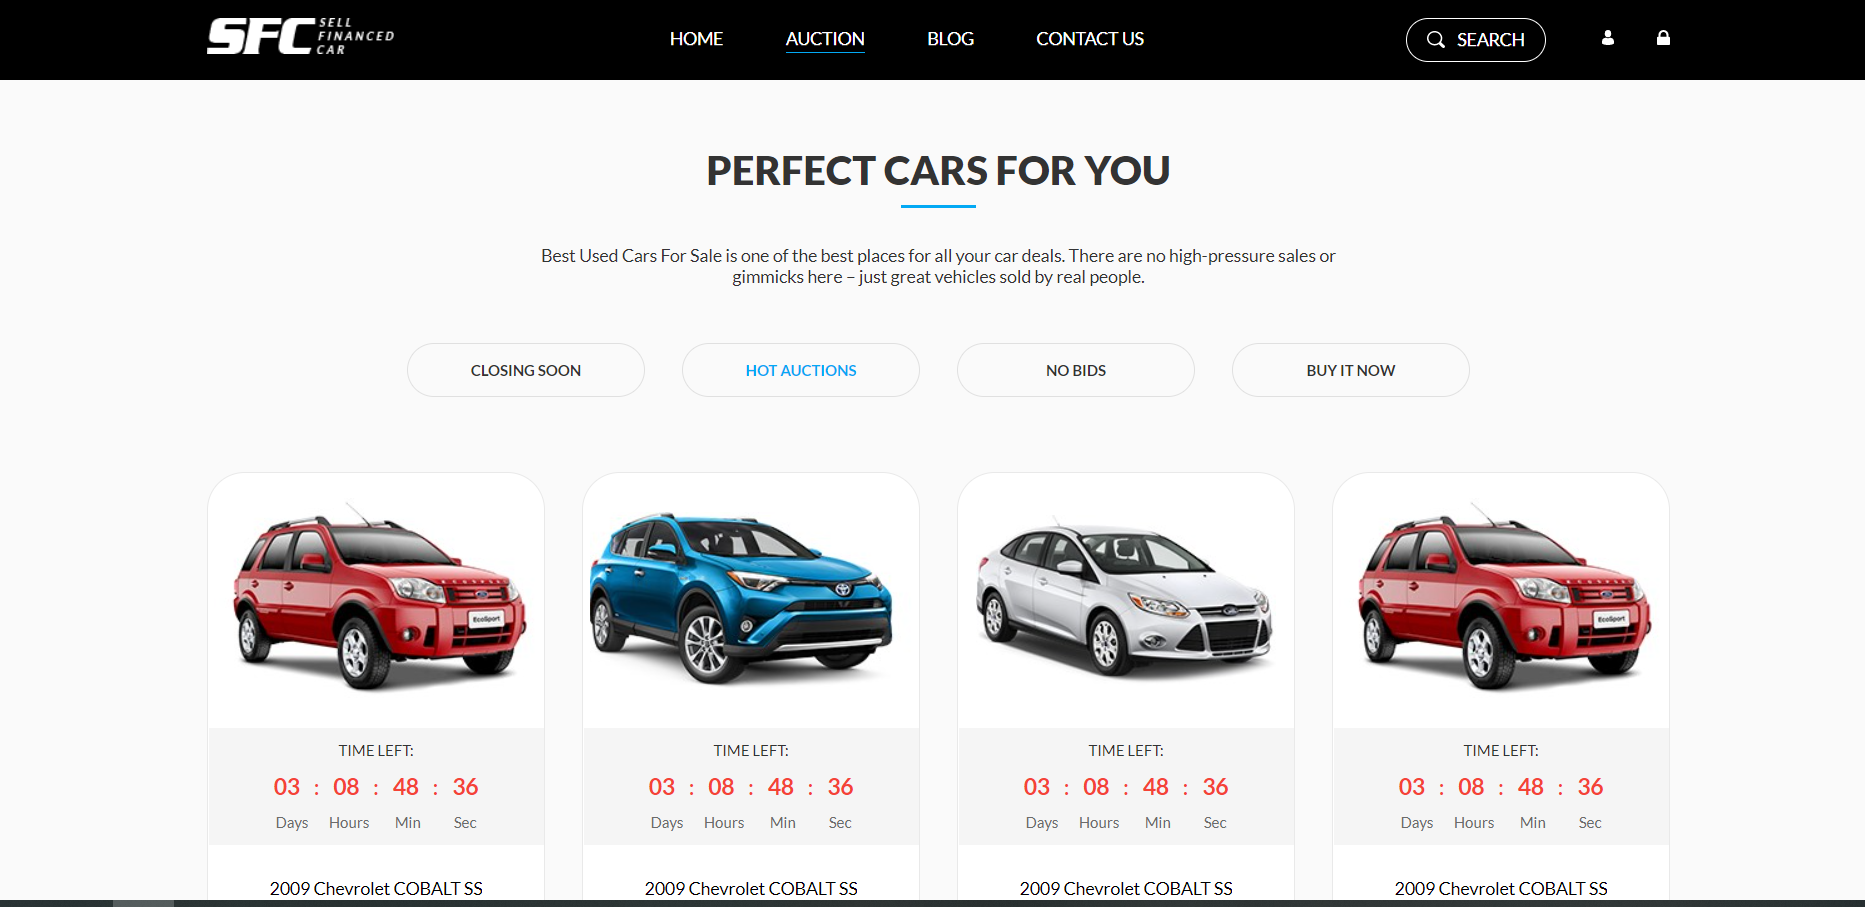 HTML Theme for Selling Cars made with CSS, HTML, JAVASCRIPT